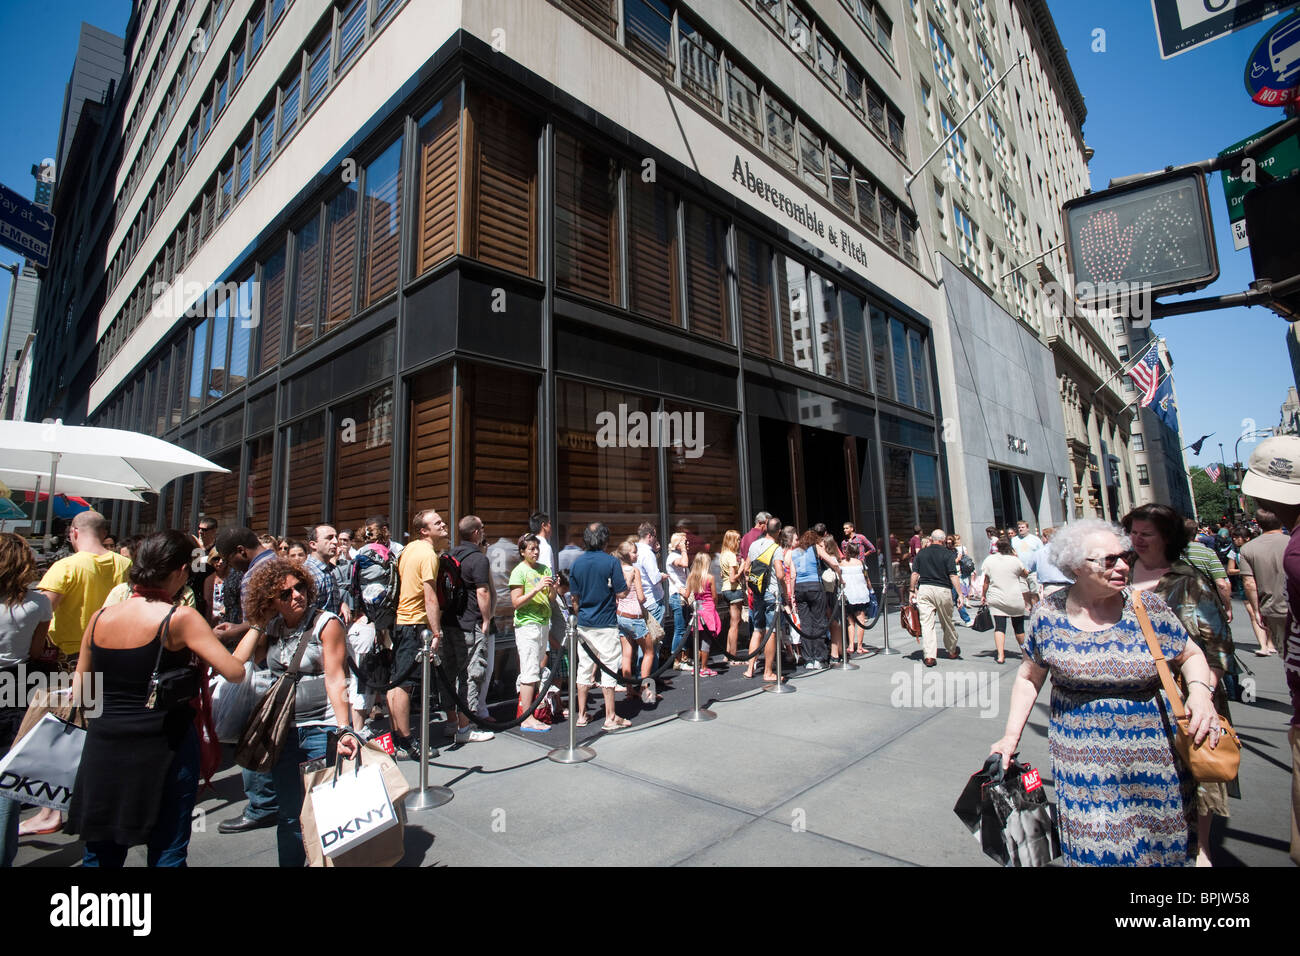 The Abercrombie & Fitch clothing store in Midtown Manhattan in New York on  Saturday, August 28, 2010. (© Richard B. Levine Stock Photo - Alamy